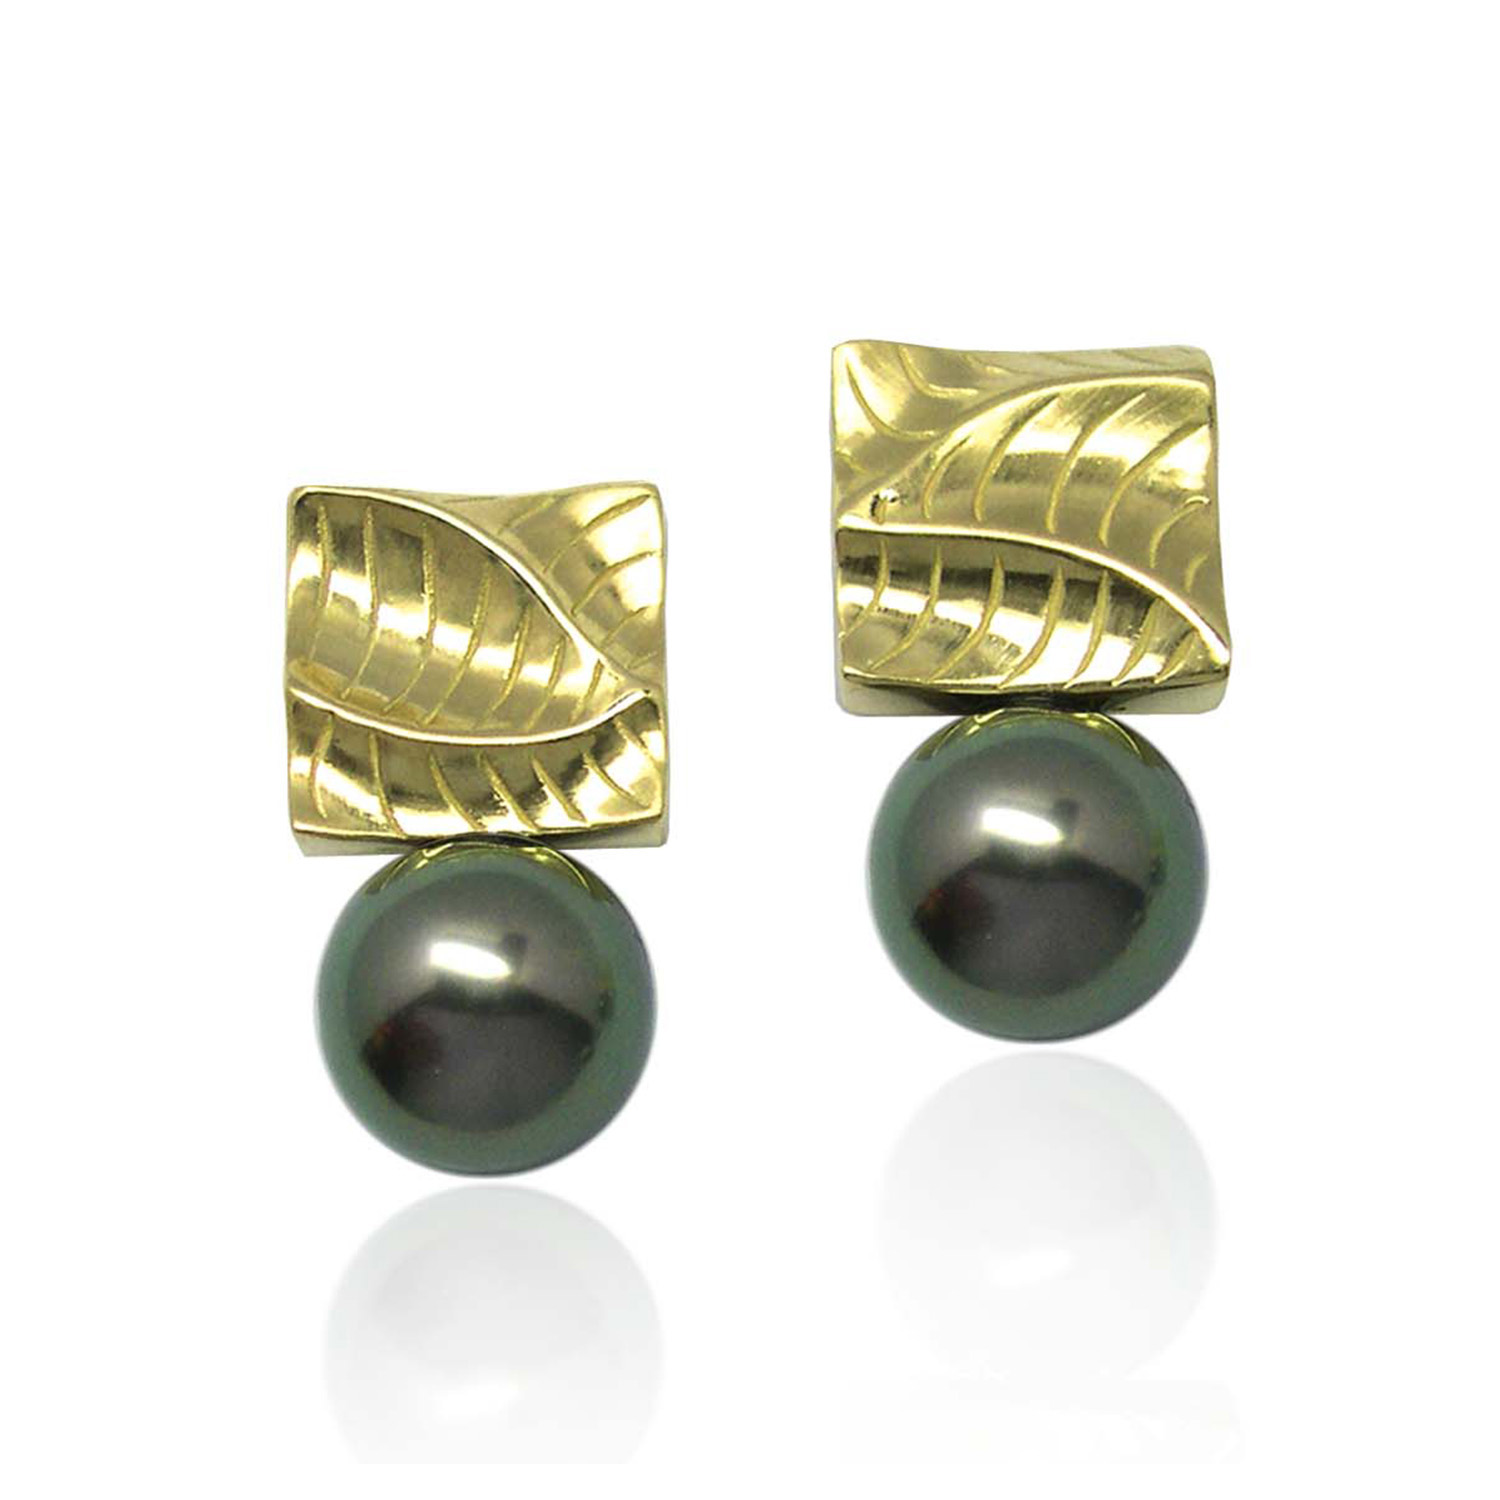 Small Square Pearl Earrings from K.Mita